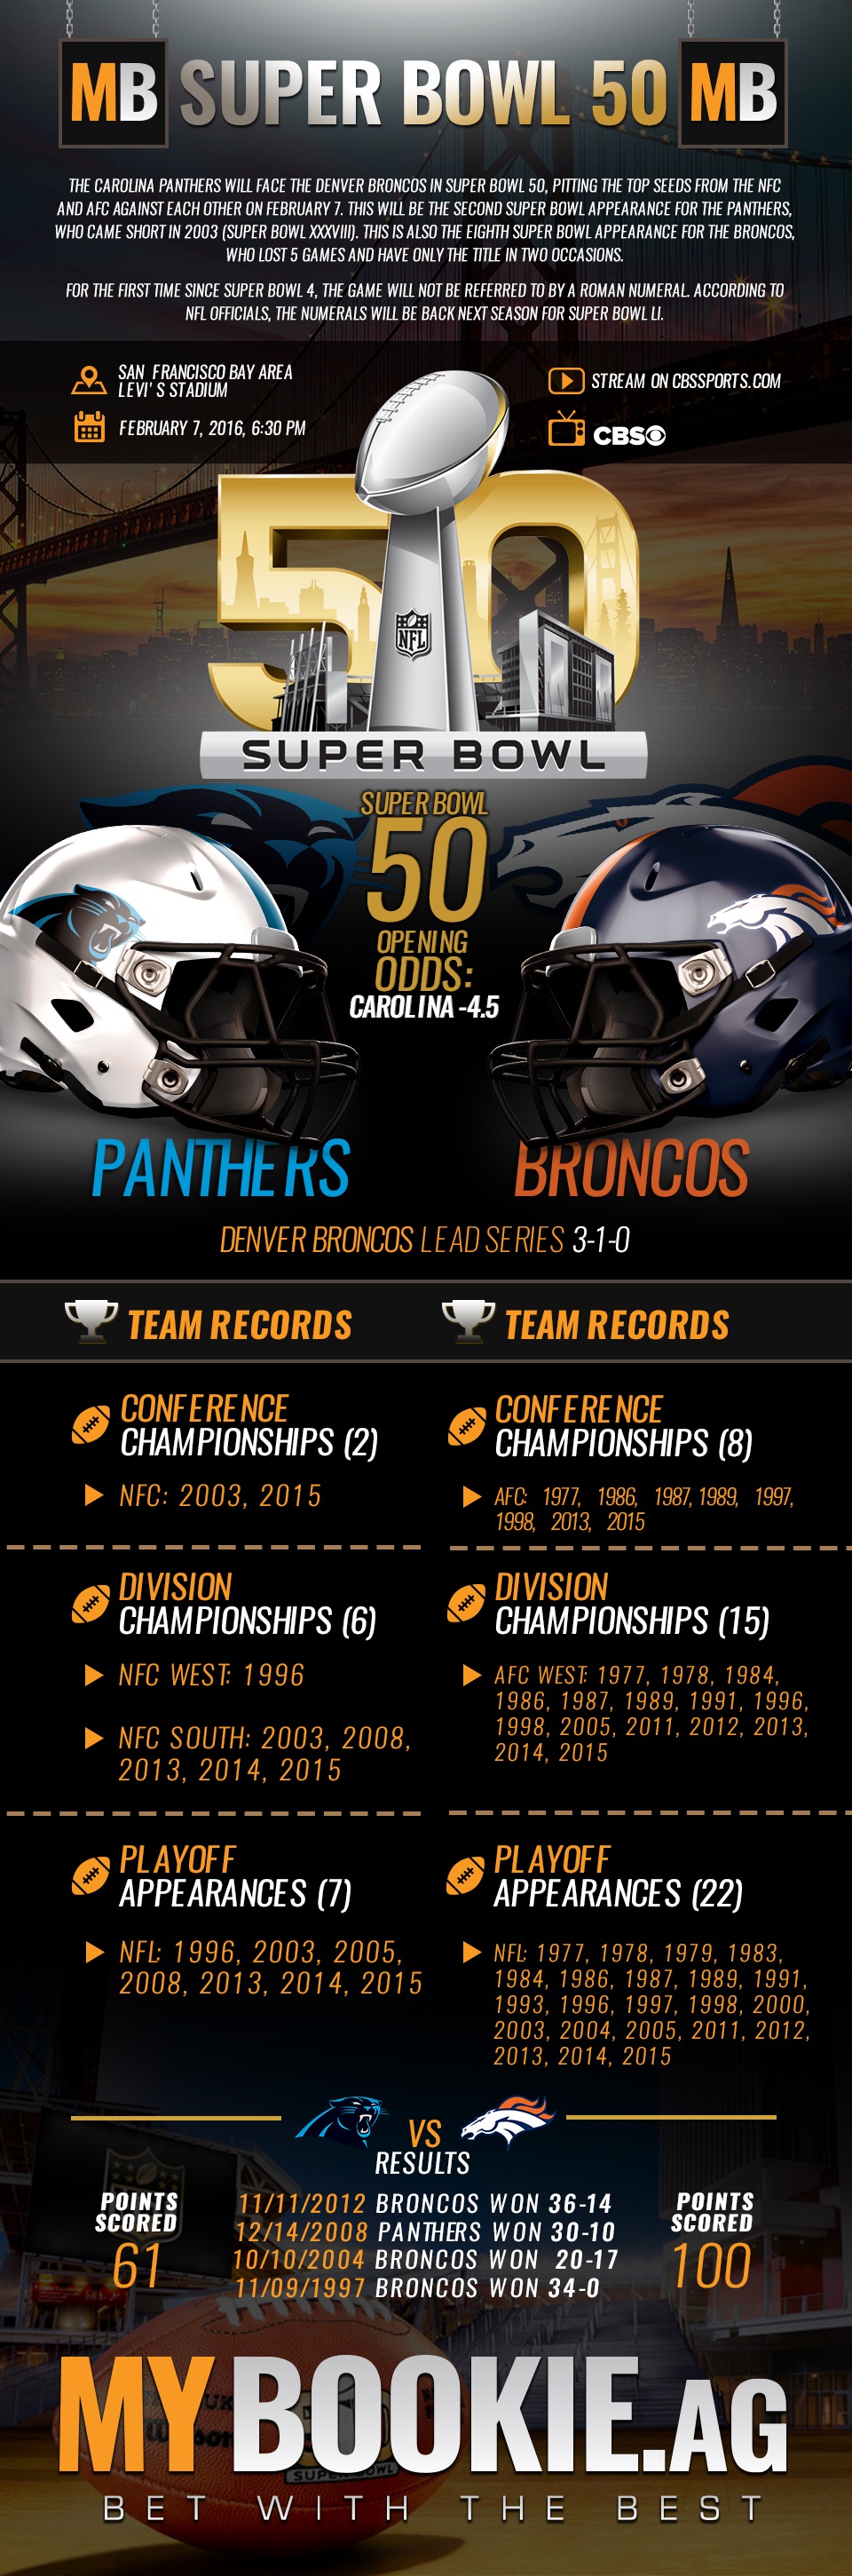 Complete Betting Guide for the upcoming Super Bowl 50